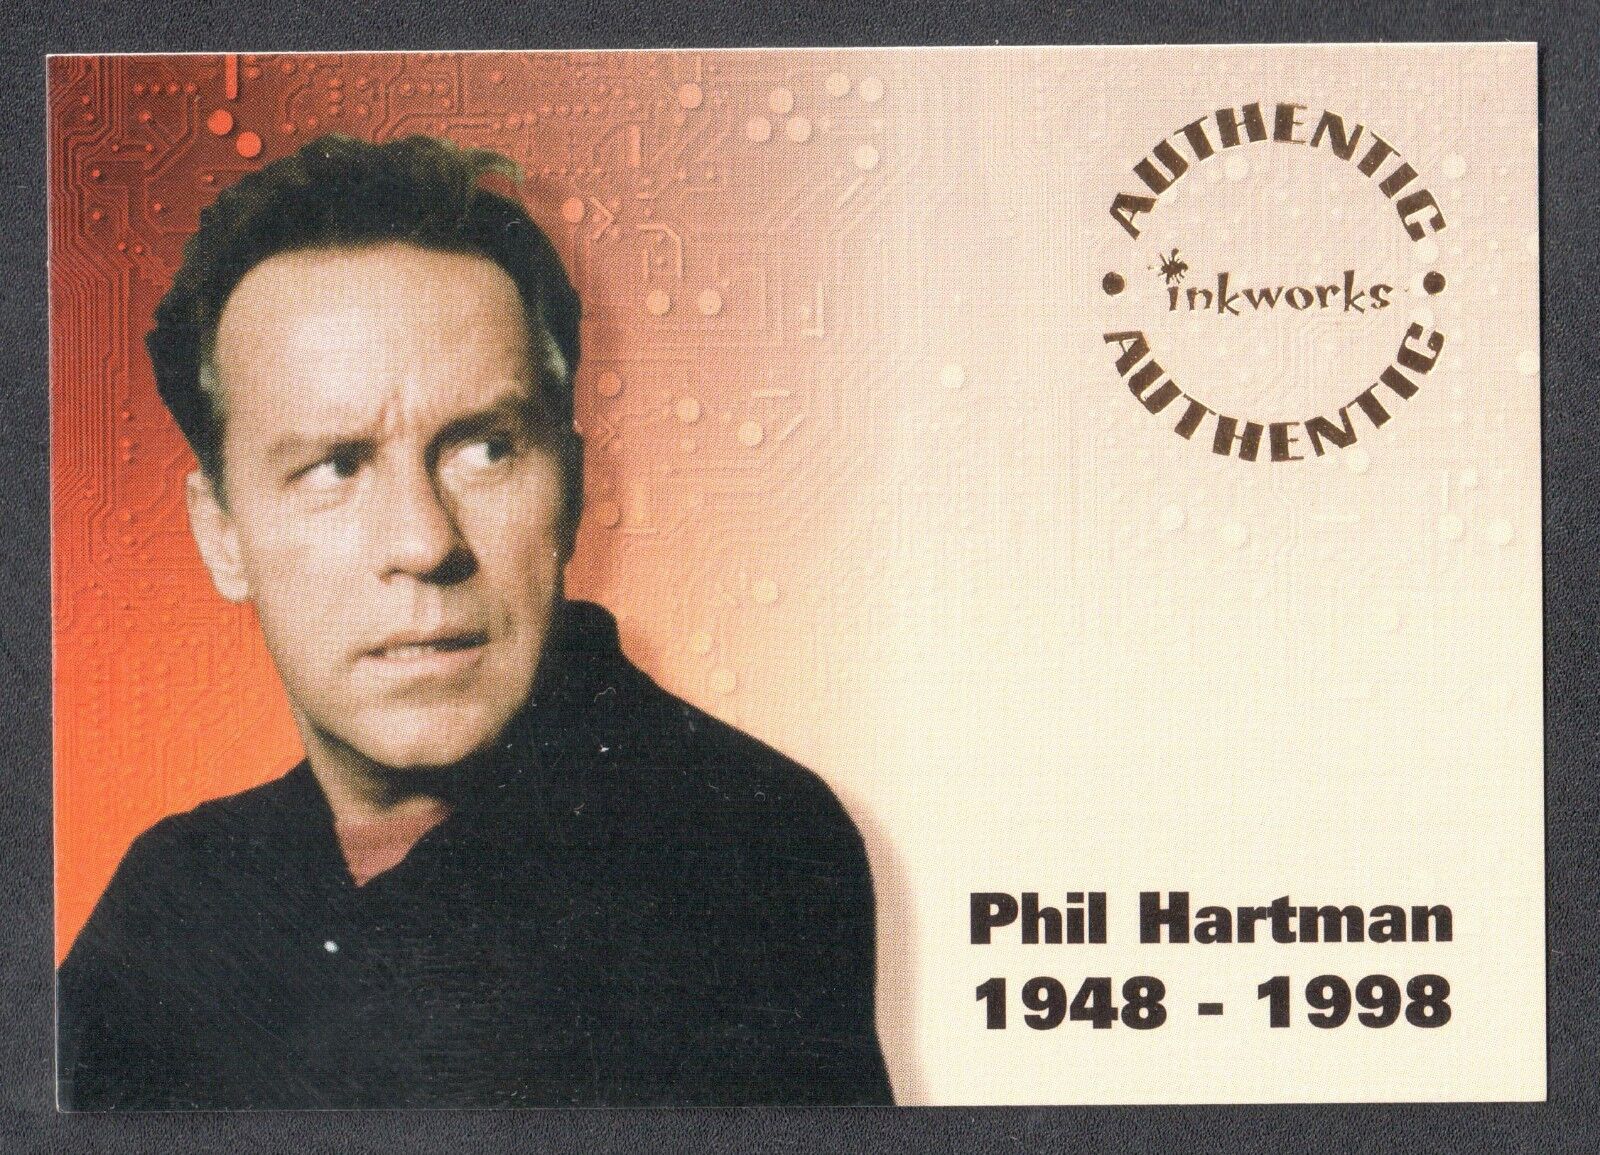 SMALL SOLDIERS Inkworks 1998 PHIL HARTMAN (1948-1998) RARE FOIL TRIBUTE CARD 